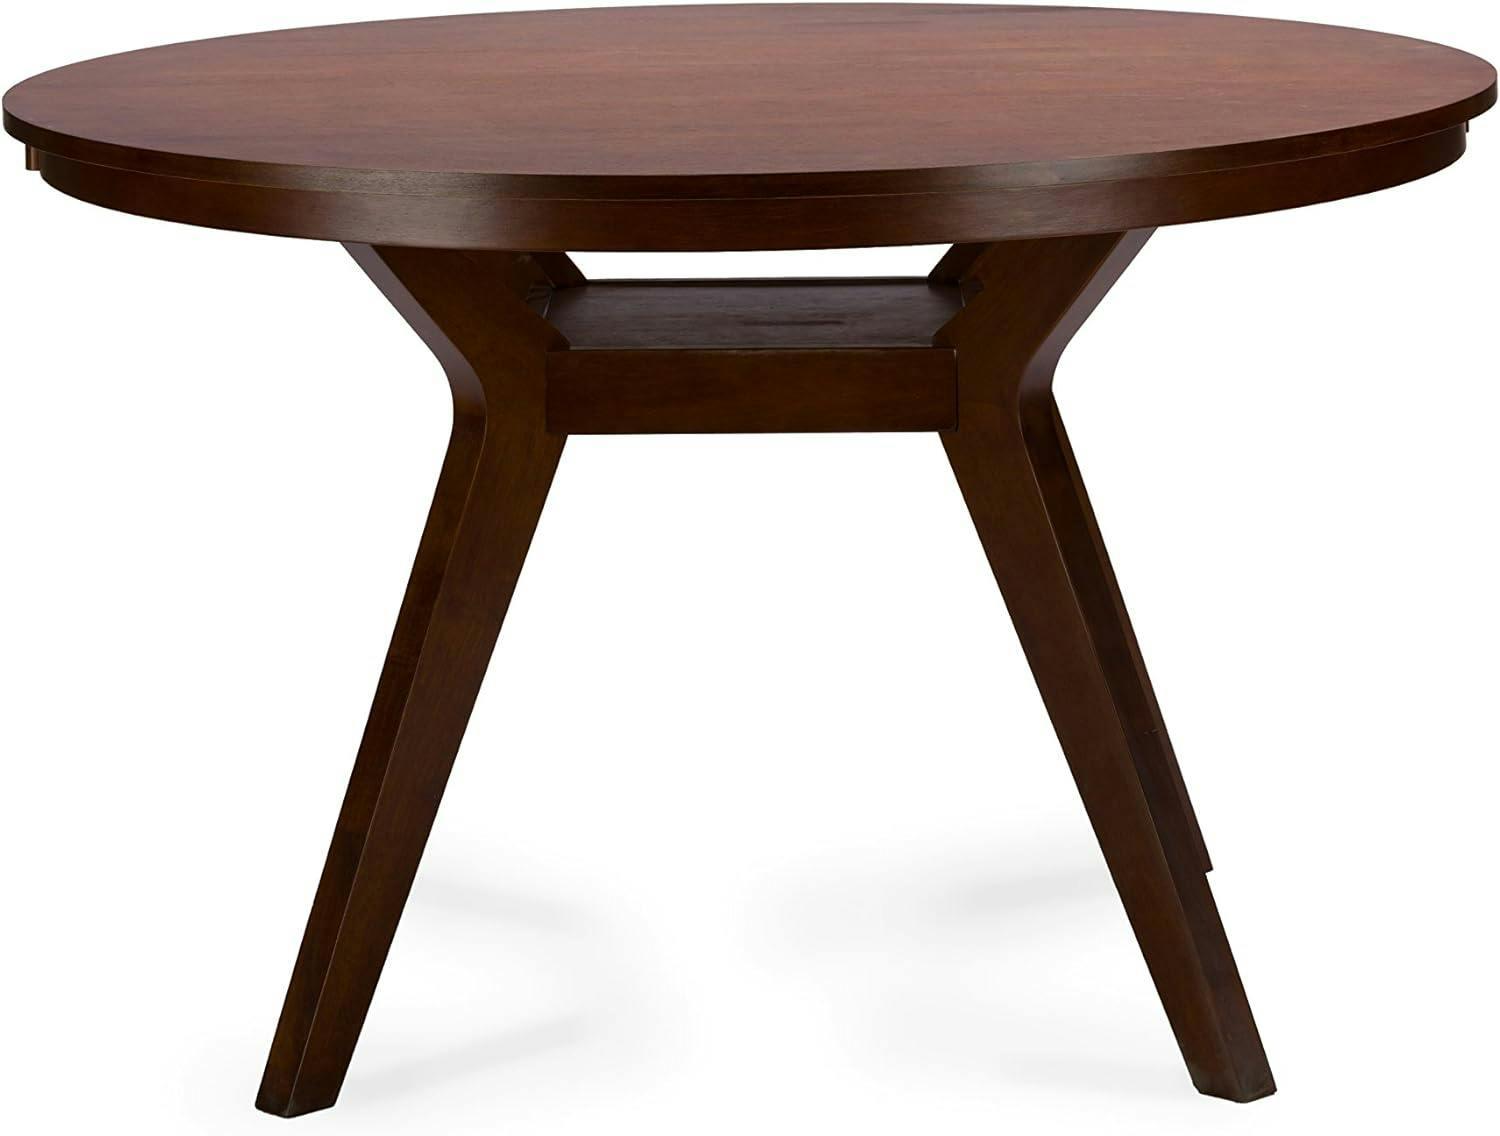 Montreal Art Deco Inspired Round Walnut Dining Table - Seats 8